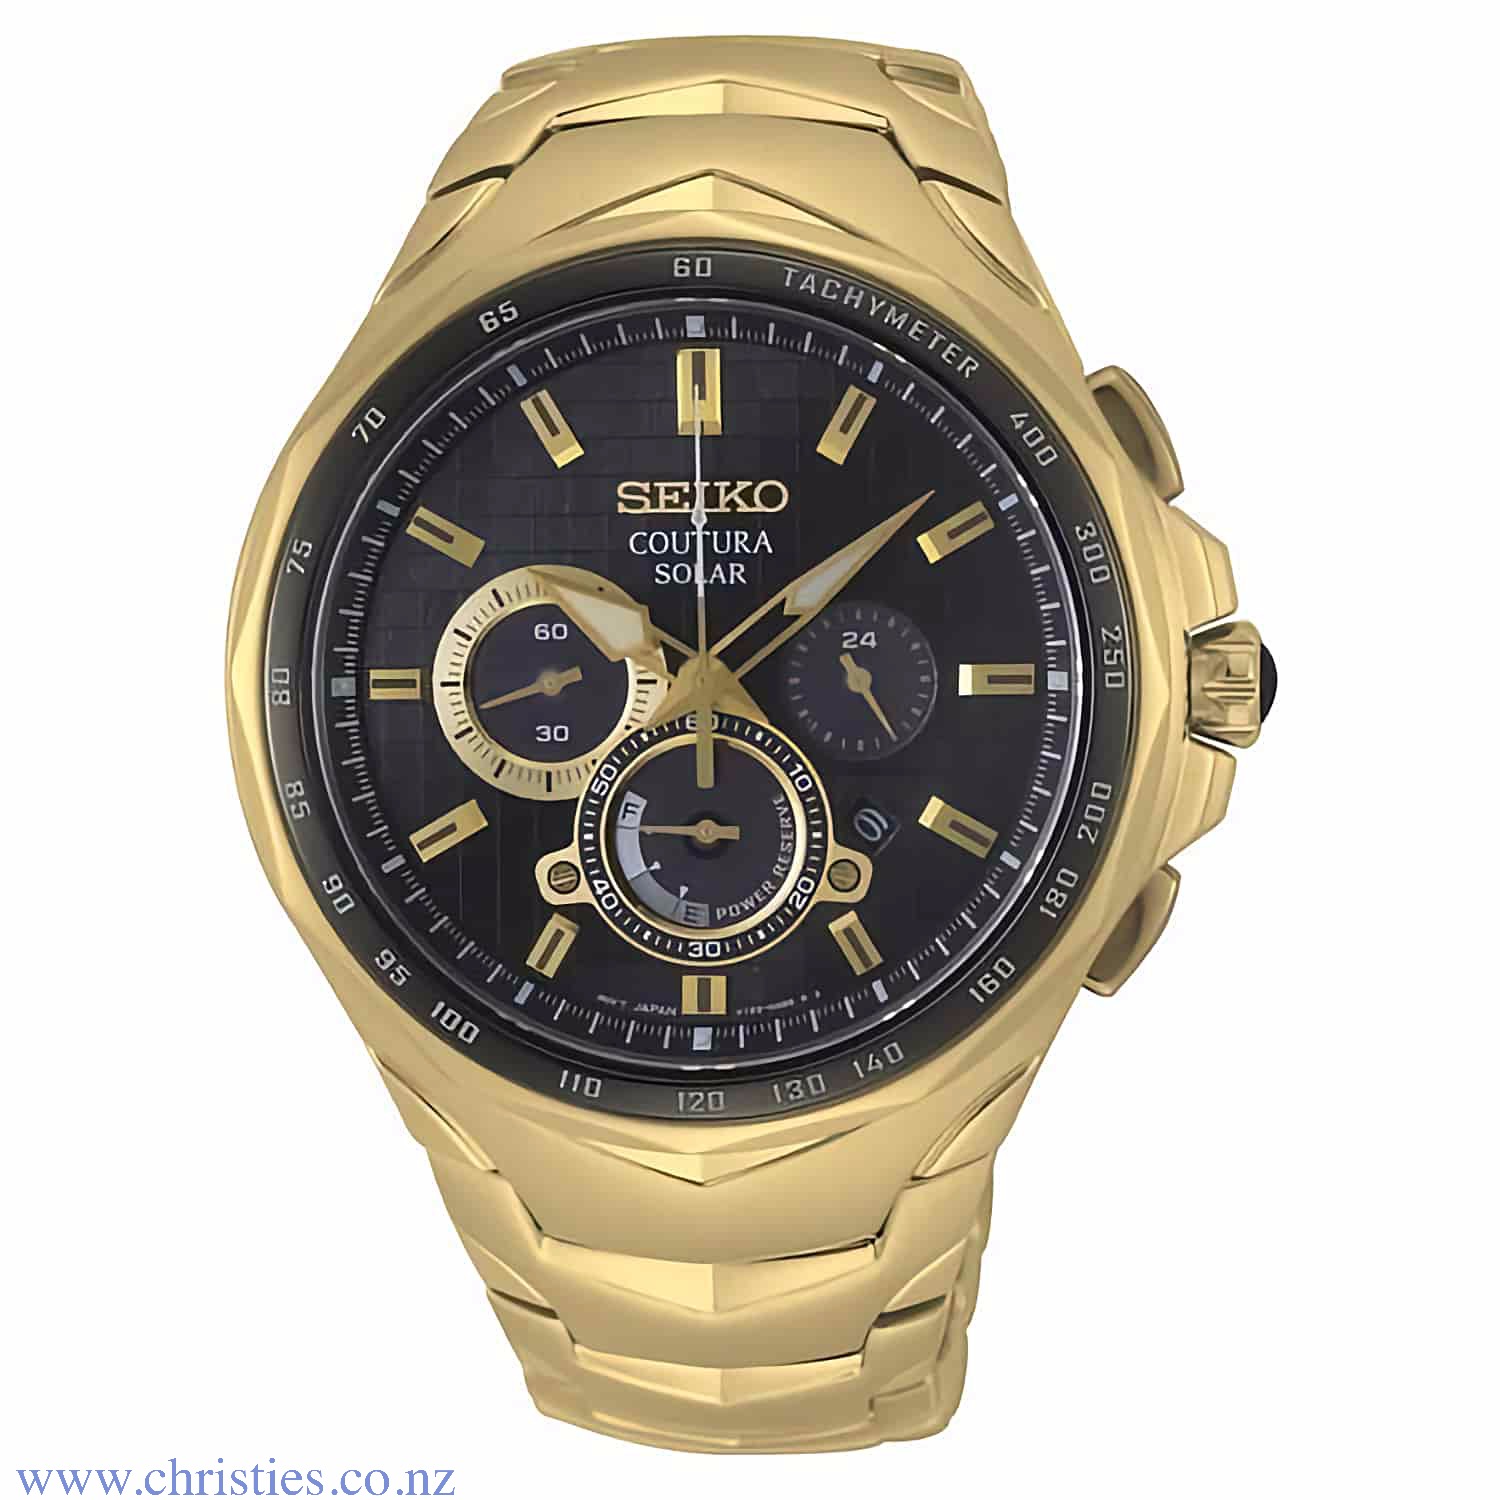 SSC754P SEIKO Coutura Chronograph Watch. The Seiko SSC754P Coutura Mens Watch is a modern watch with the reliability and functionality of a classic watch LAYBUY - Pay it easy, in 6 weekly payments and have it now. Only pay the price of your purcha @christ